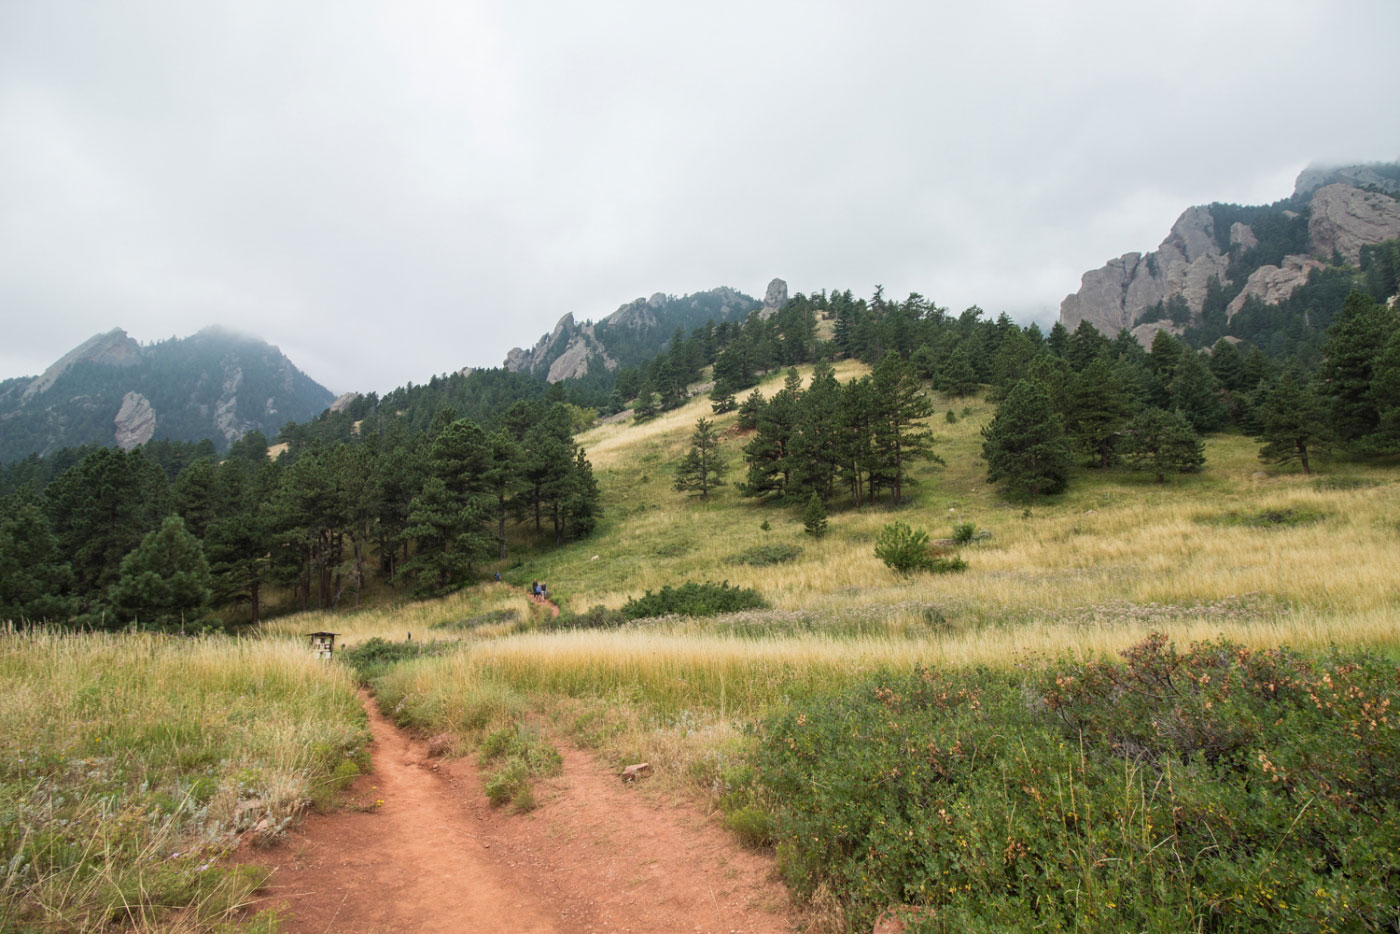 Hike Green Mountain and Bear Canyon Loop in Chautauqua Park, Colorado - Stav is Lost